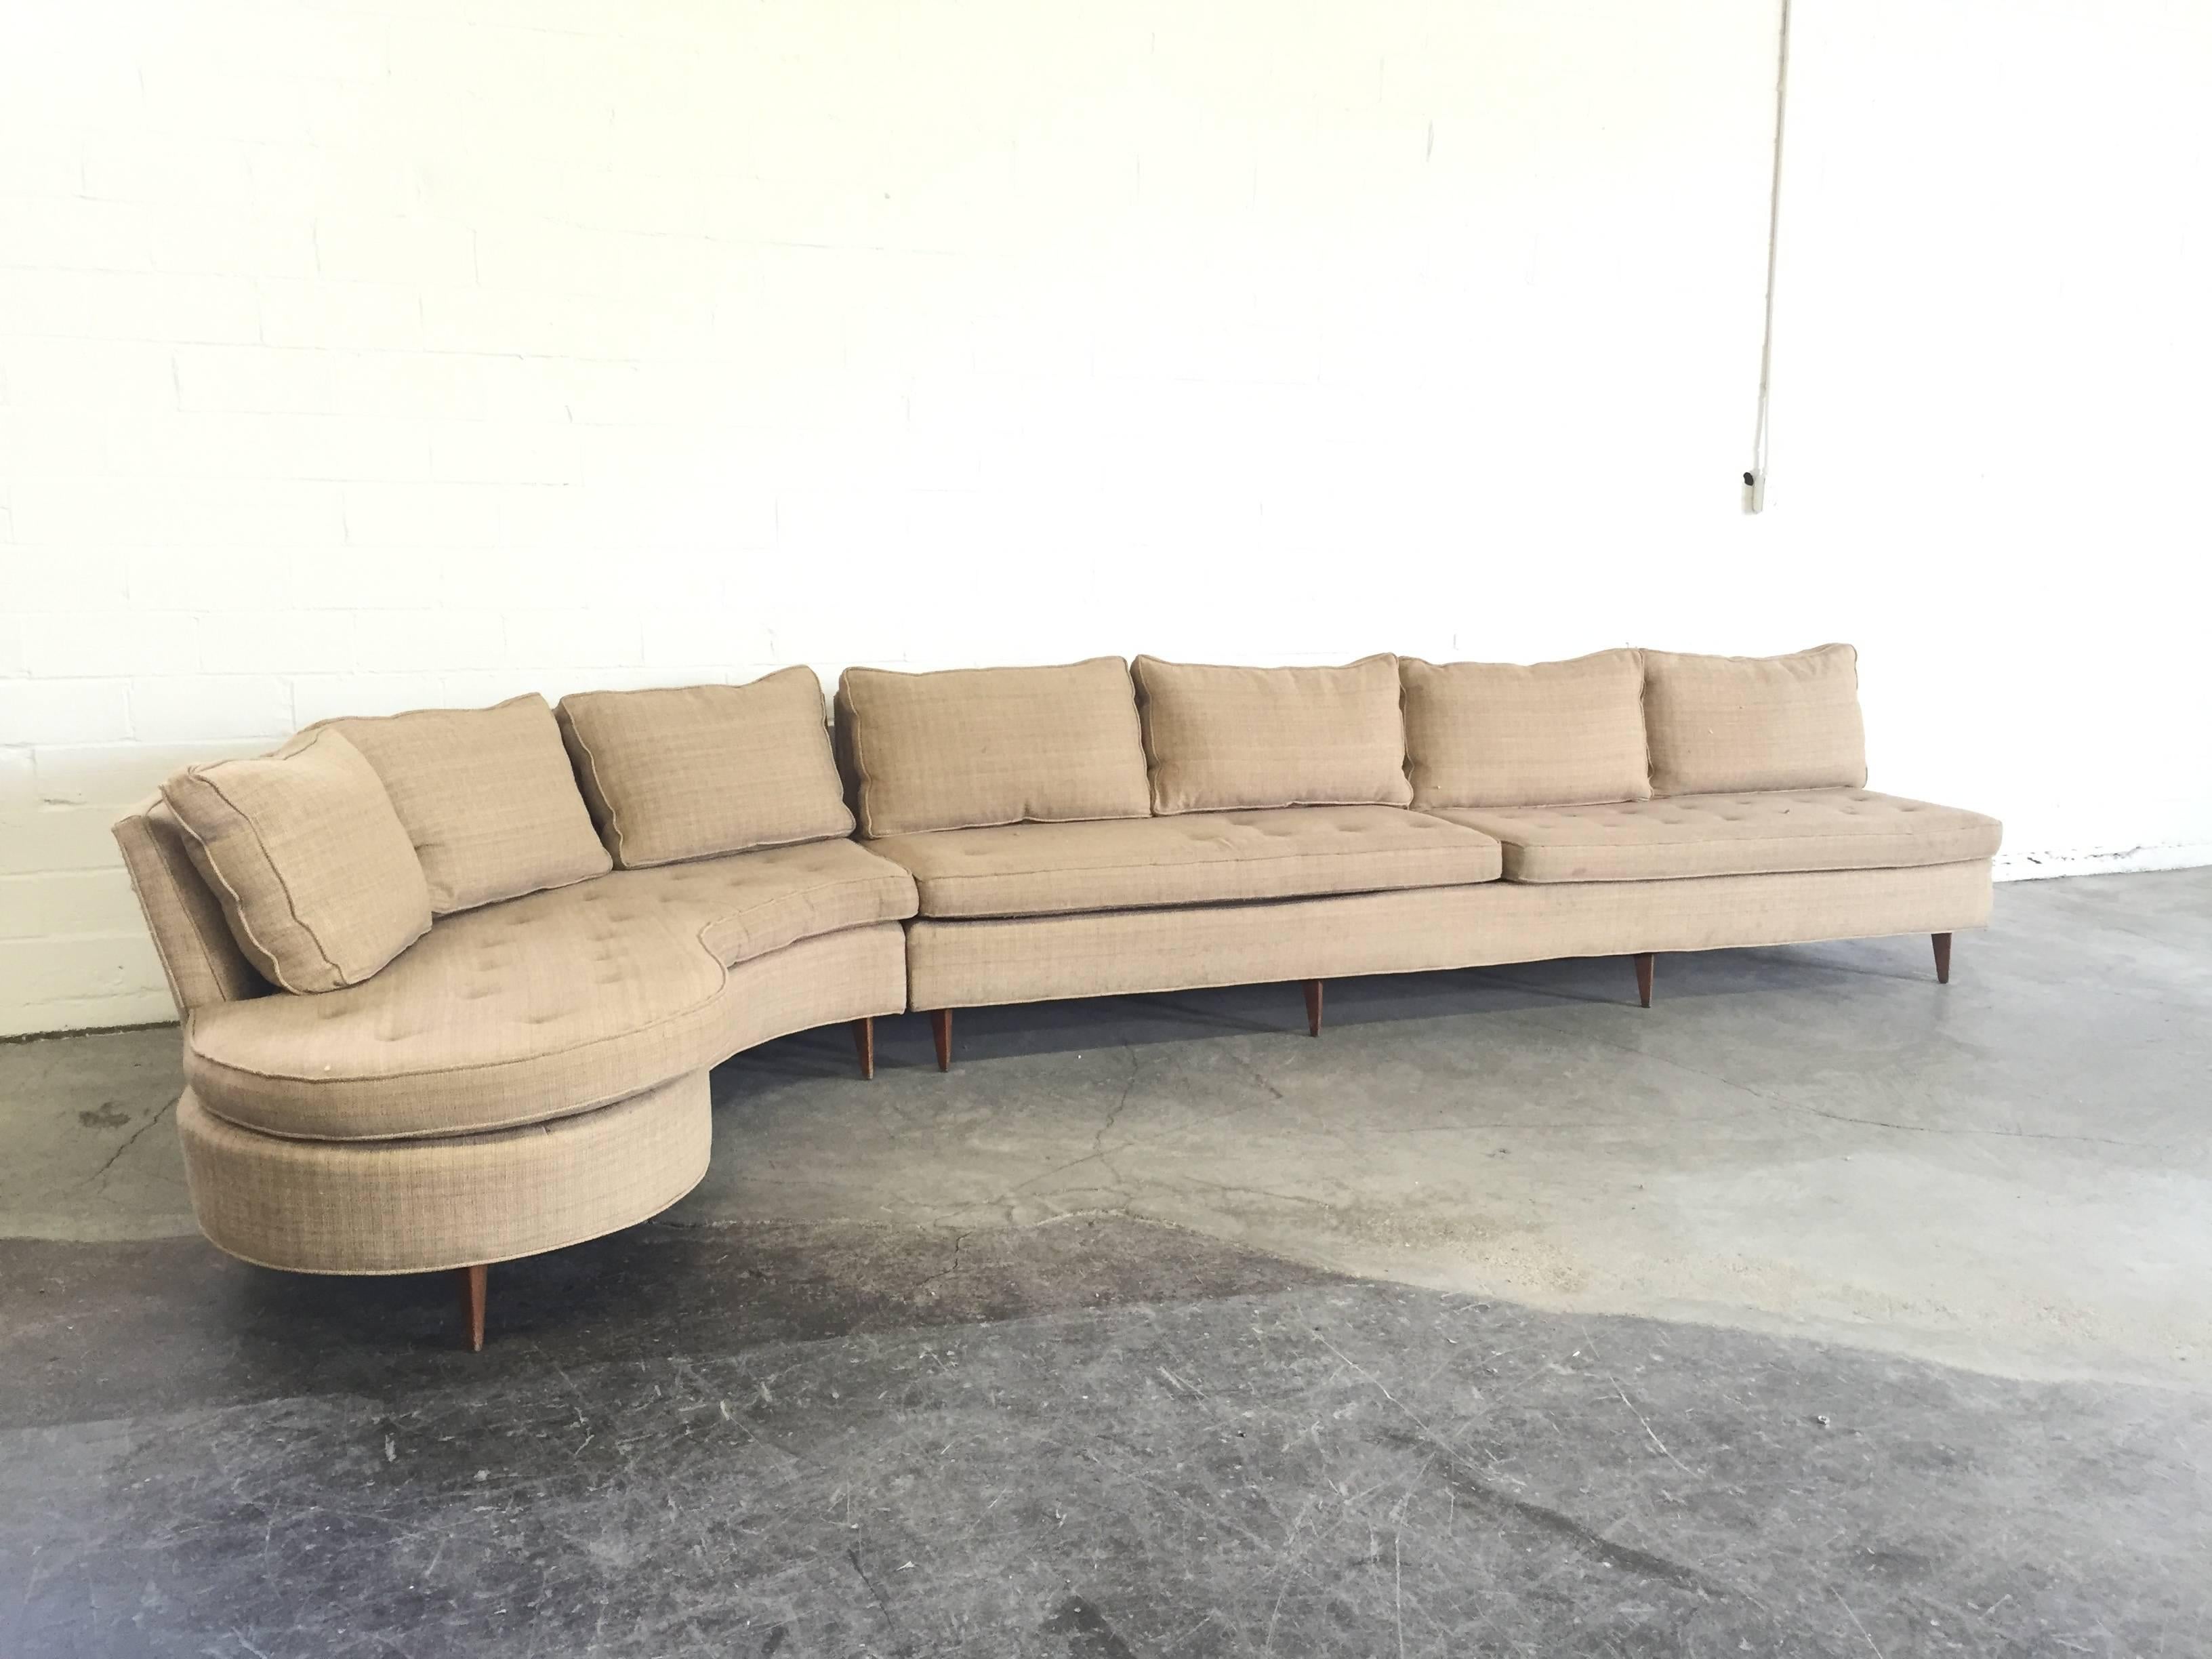 Erwin Lambeth sectional sofa. Needs reupholstery and refinishing.

dimensions: 162.5